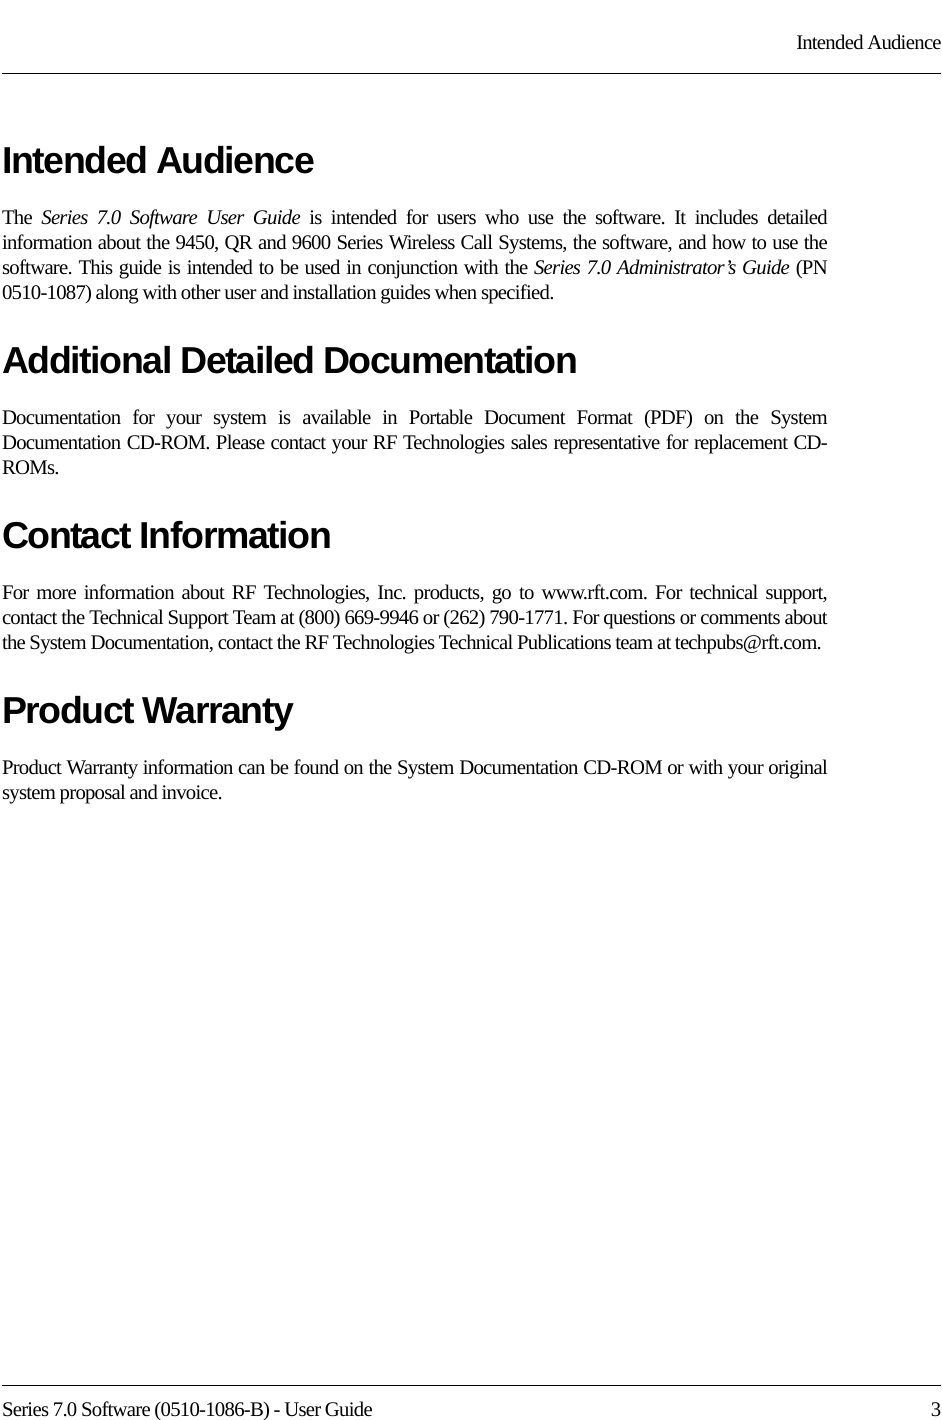 Series 7.0 Software (0510-1086-B) - User Guide  3Intended AudienceIntended AudienceThe  Series 7.0 Software User Guide is intended for users who use the software. It includes detailed information about the 9450, QR and 9600 Series Wireless Call Systems, the software, and how to use the software. This guide is intended to be used in conjunction with the Series 7.0 Administrator’s Guide (PN 0510-1087) along with other user and installation guides when specified.Additional Detailed DocumentationDocumentation for your system is available in Portable Document Format (PDF) on the System Documentation CD-ROM. Please contact your RF Technologies sales representative for replacement CD-ROMs.Contact InformationFor more information about RF Technologies, Inc. products, go to www.rft.com. For technical support, contact the Technical Support Team at (800) 669-9946 or (262) 790-1771. For questions or comments about the System Documentation, contact the RF Technologies Technical Publications team at techpubs@rft.com.Product WarrantyProduct Warranty information can be found on the System Documentation CD-ROM or with your original system proposal and invoice.